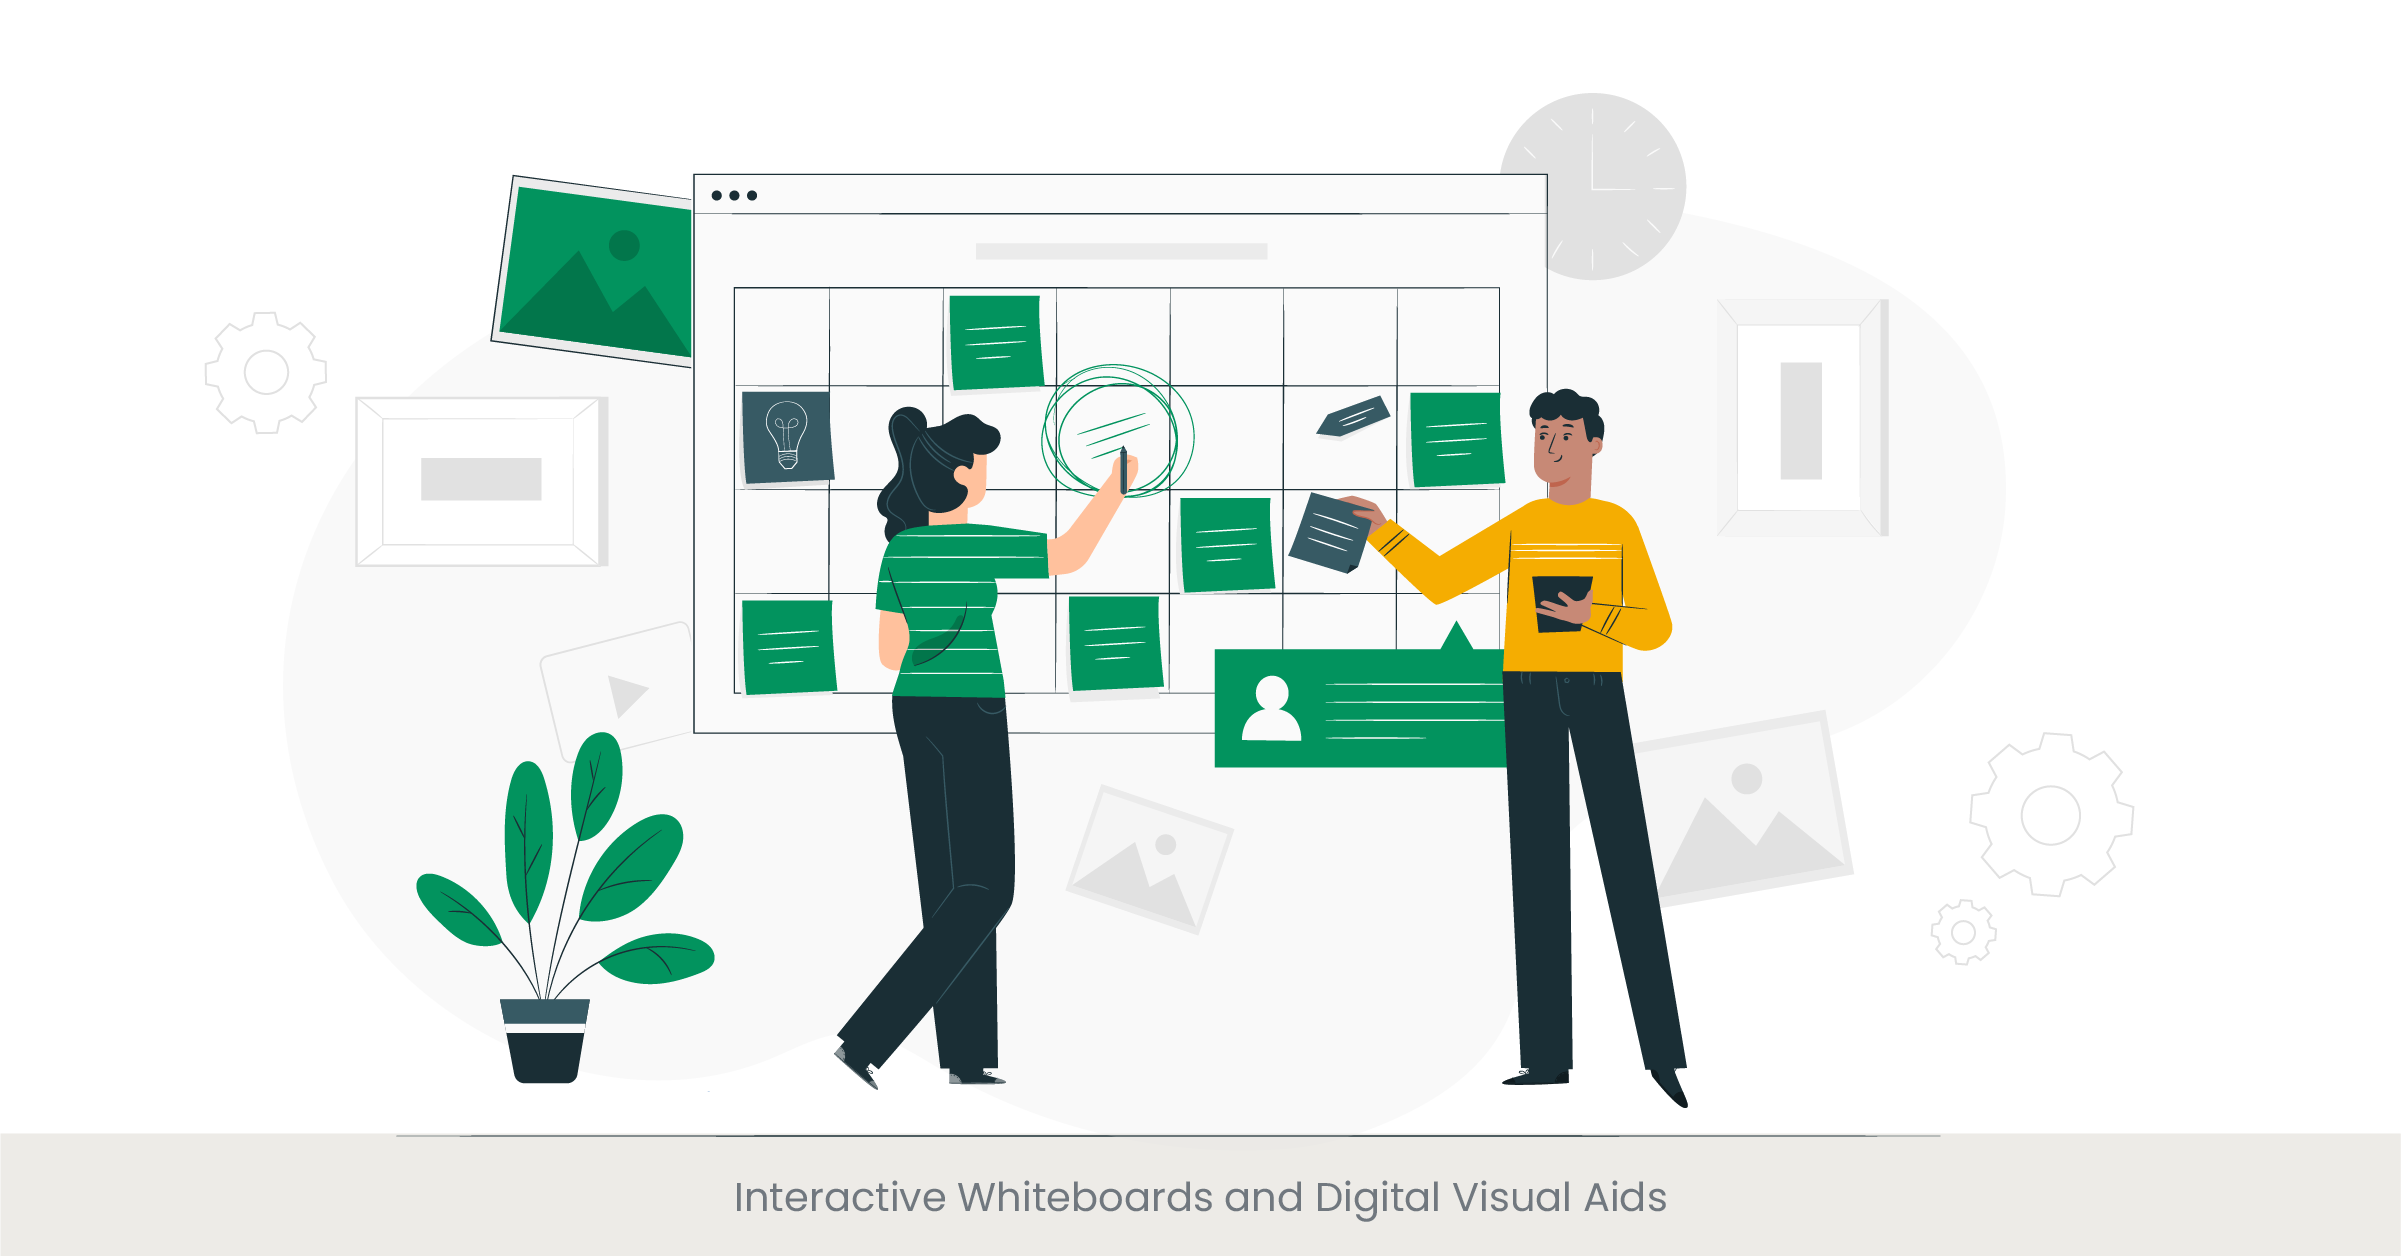 Interactive Whiteboards and Digital Visual Aids